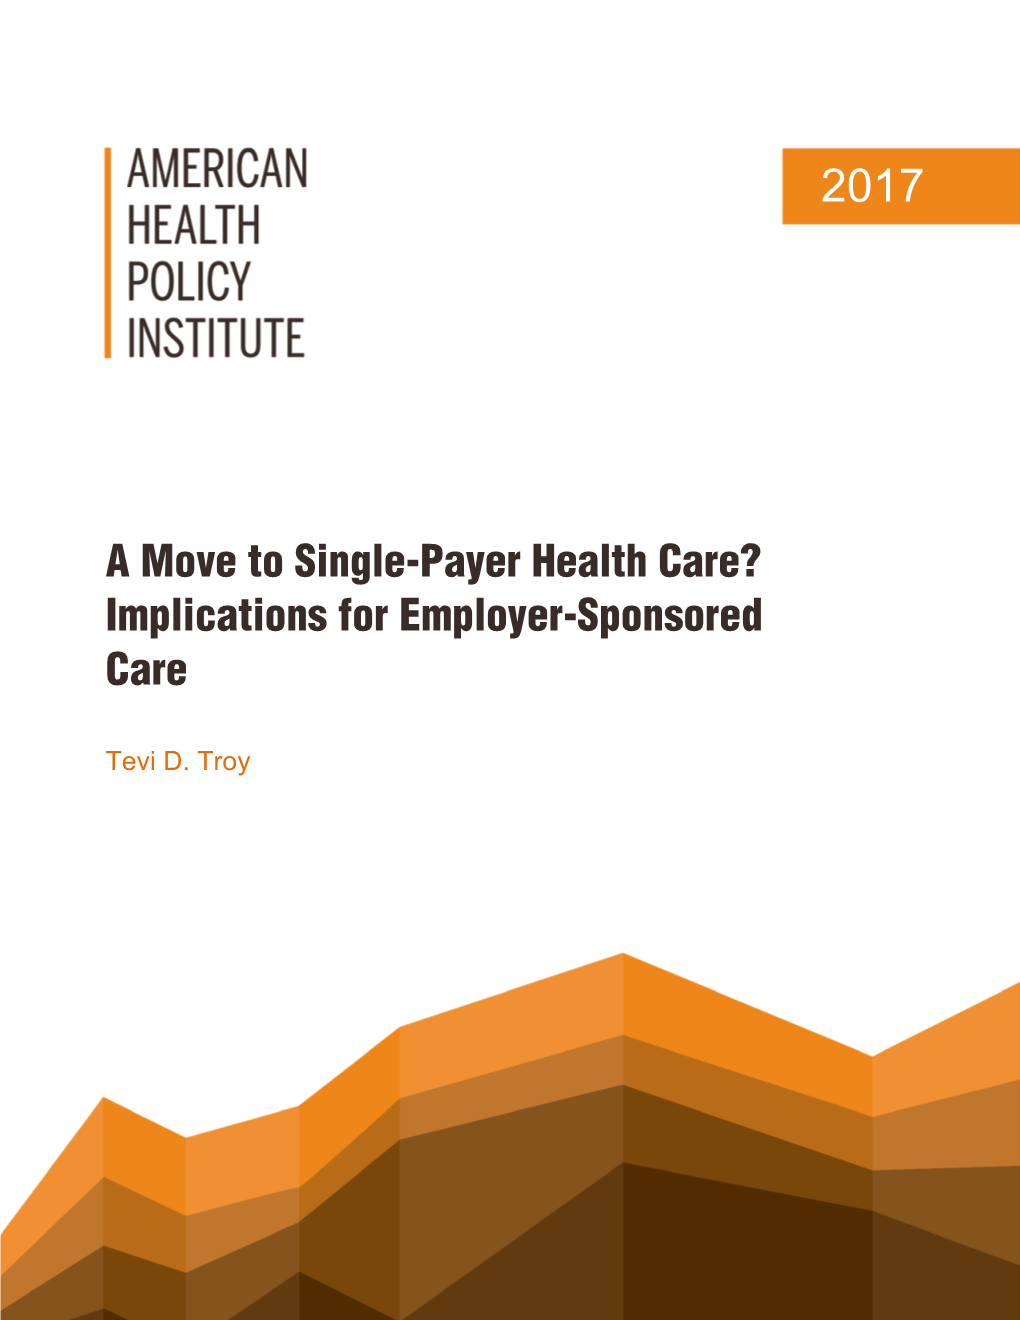 A Move to Single-Payer Health Care? Implications for Employer-Sponsored Care